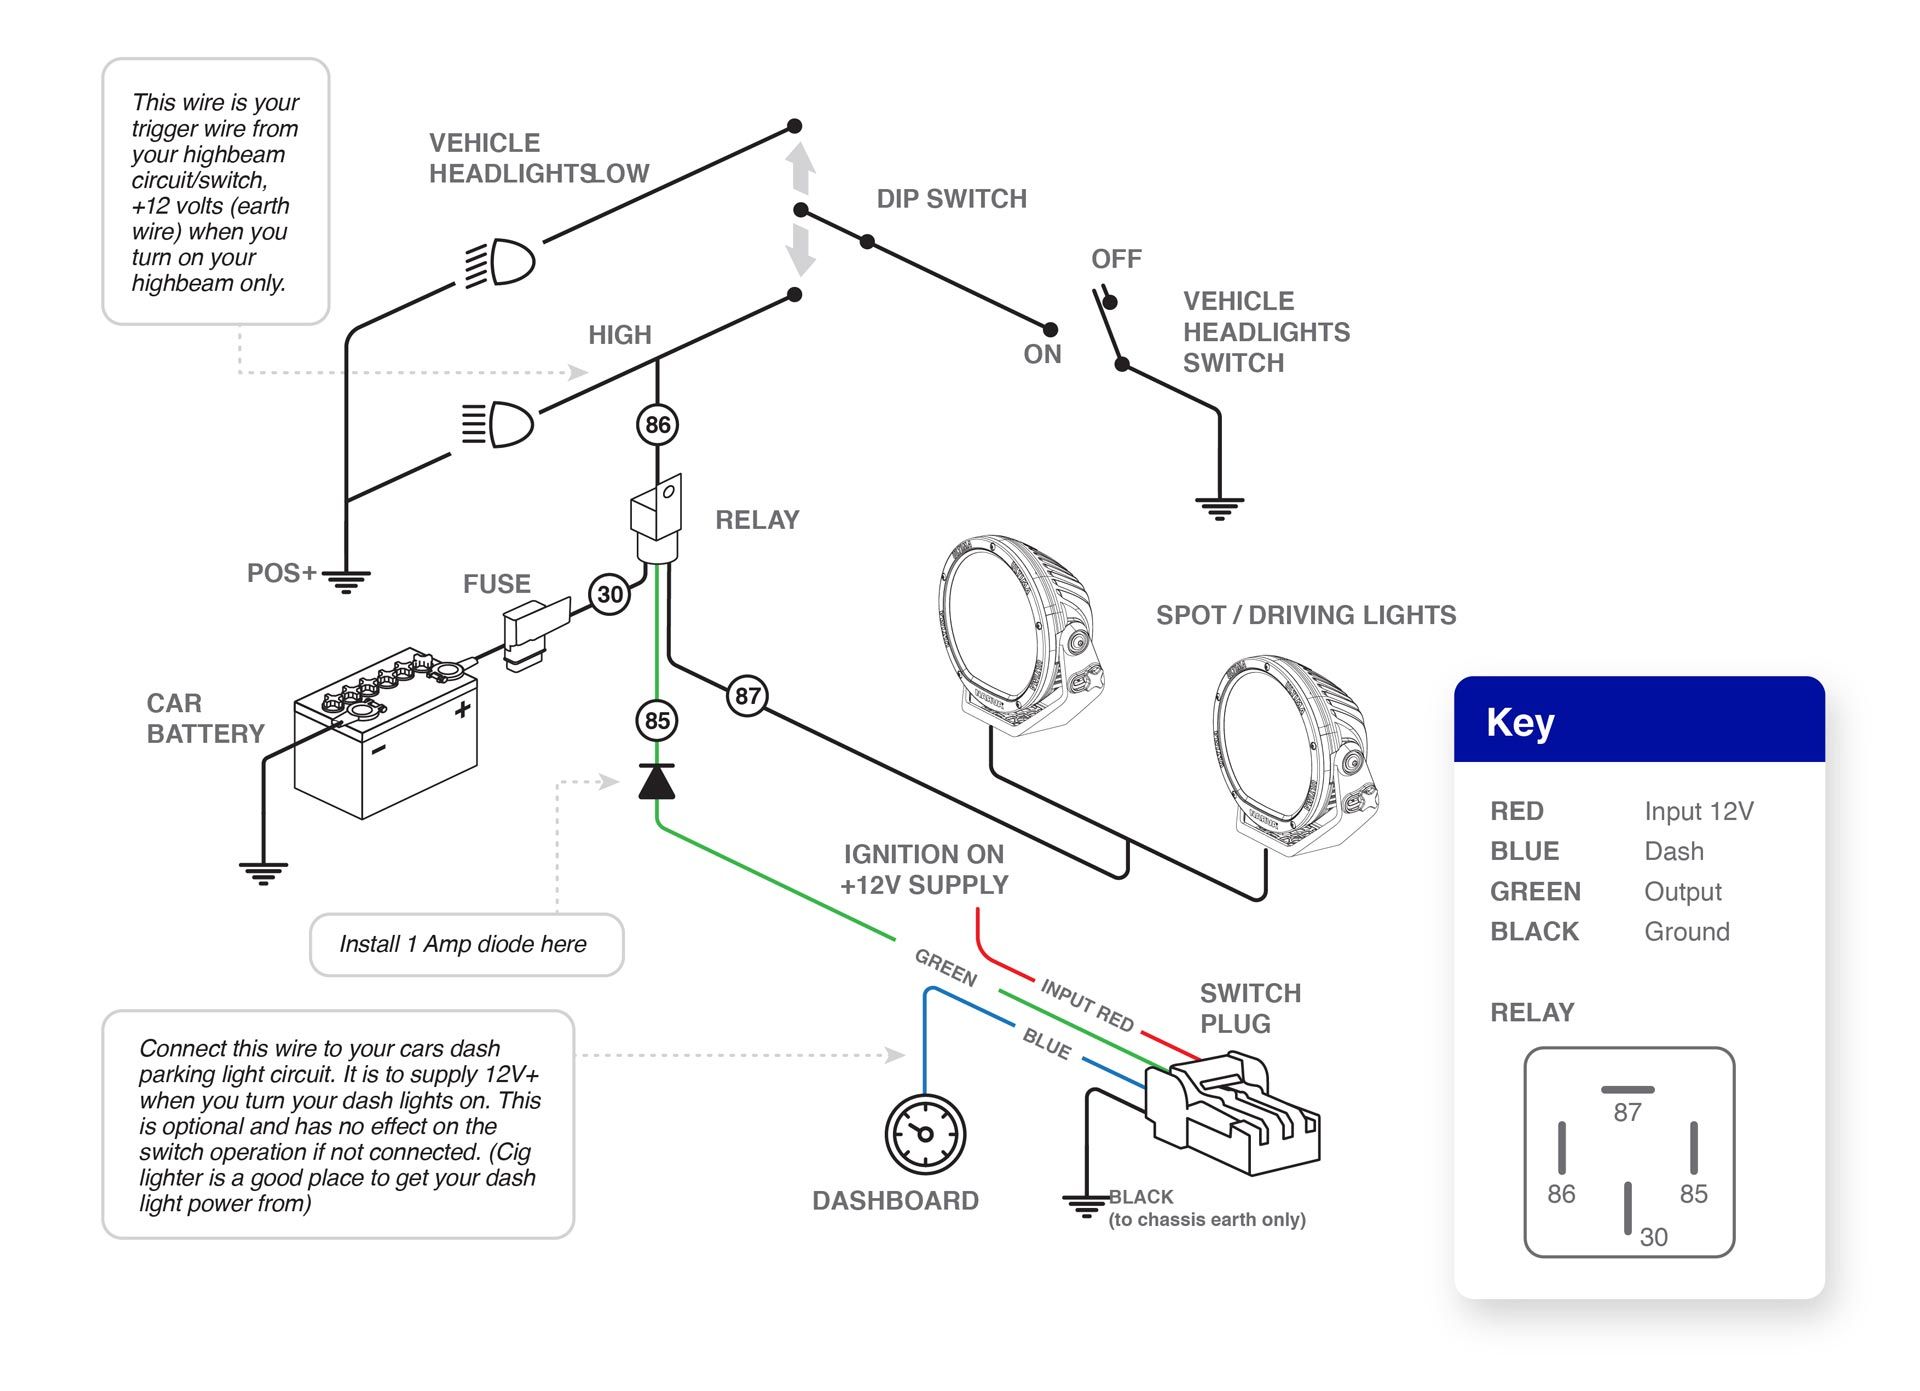 Switch wiring diagram for negative Nissan vehicles (refer to Nissan model)